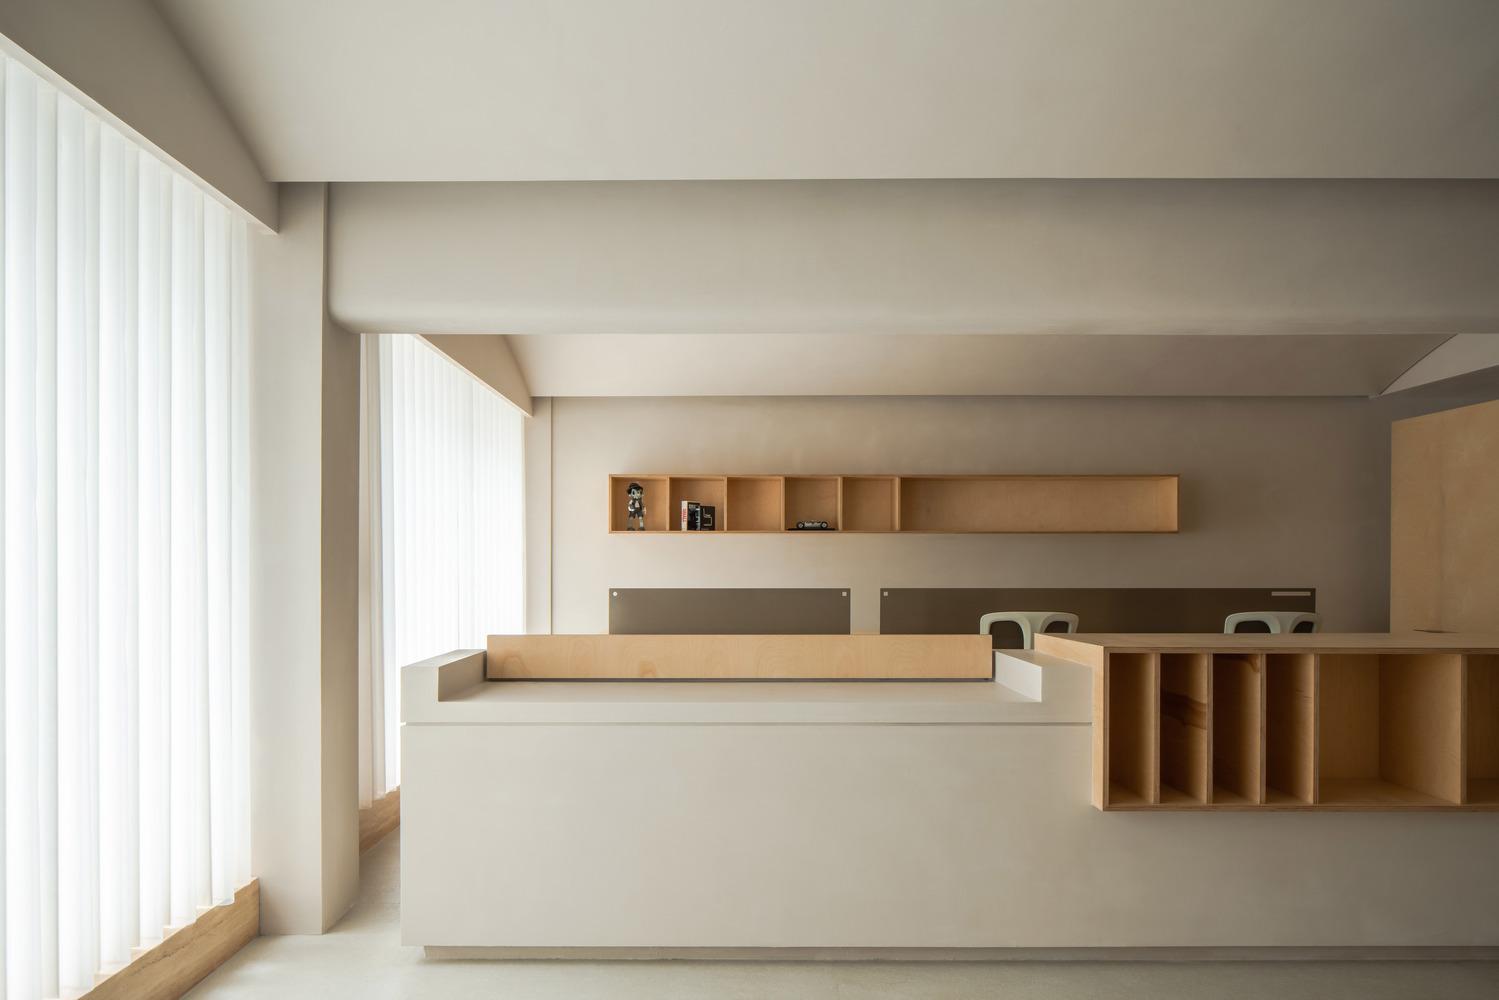 This Hangzhou Space Blurs The Line Between Home And Office